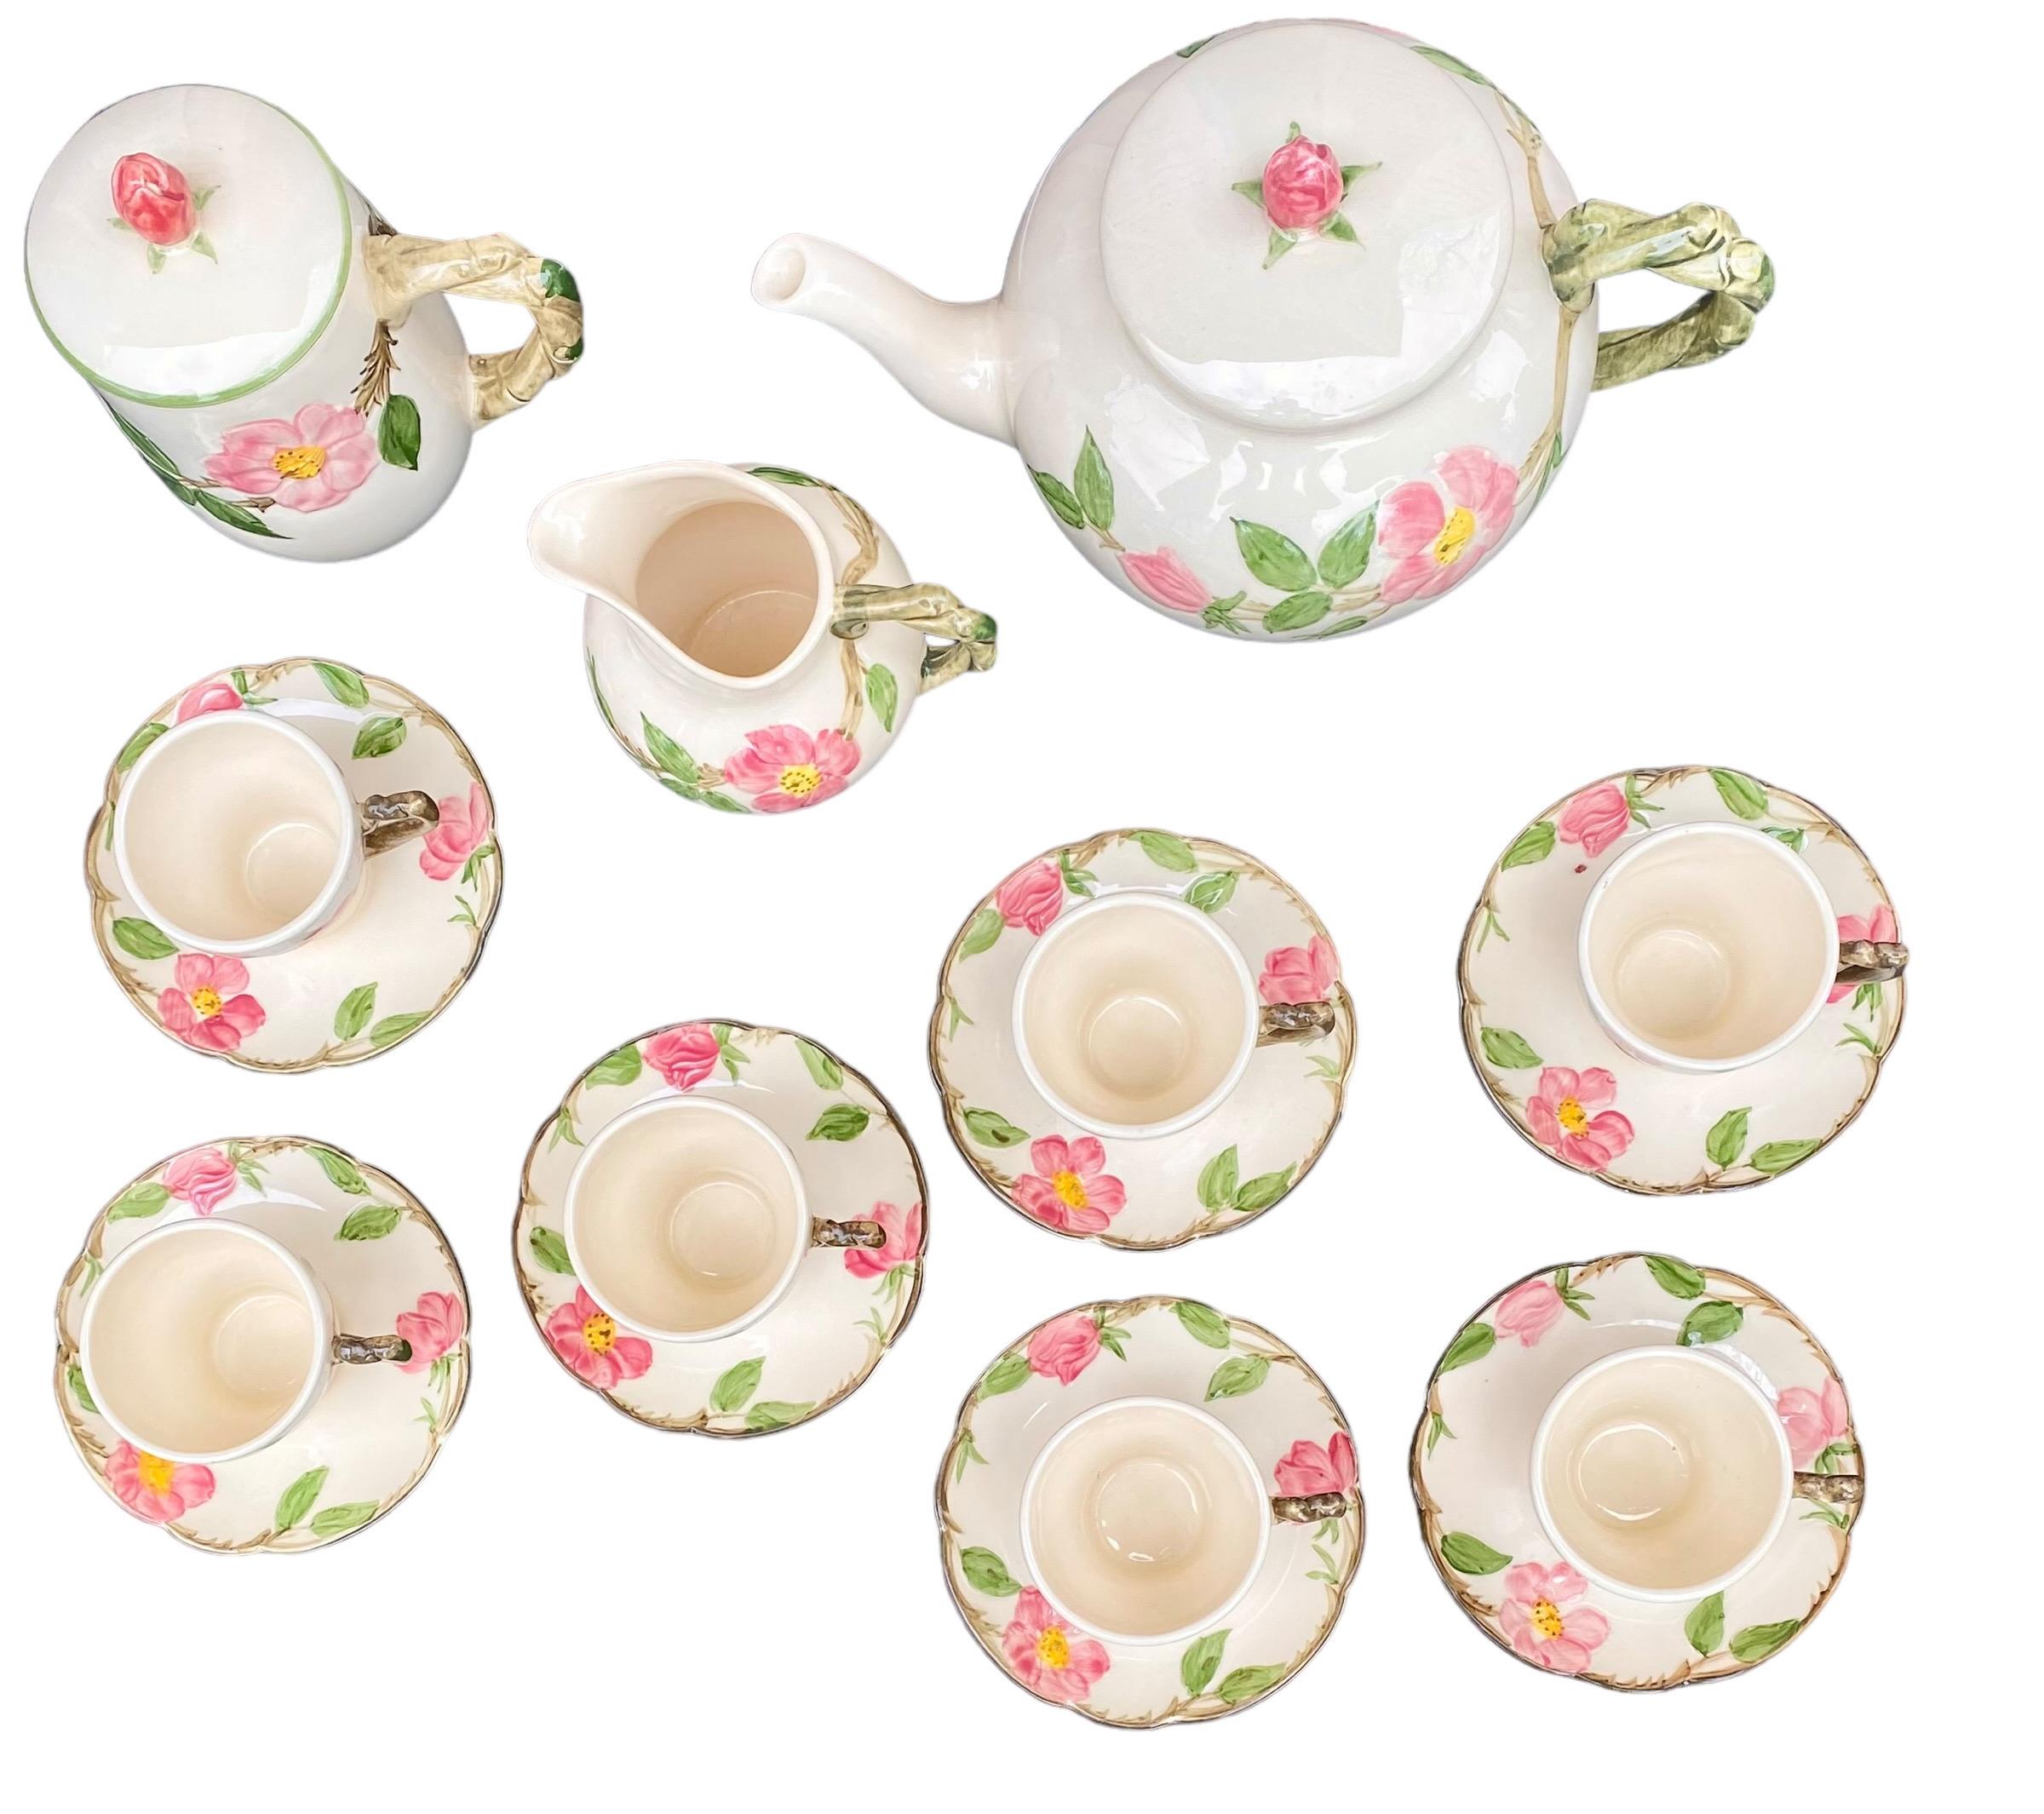 A true American Classic, Franciscan Desert Rose dinnerware has graced dining tables since 1941, including Air Force One as chosen by Jackie Kennedy and the Presidential yacht during the Nixon administration. The china pattern is as simply endearing